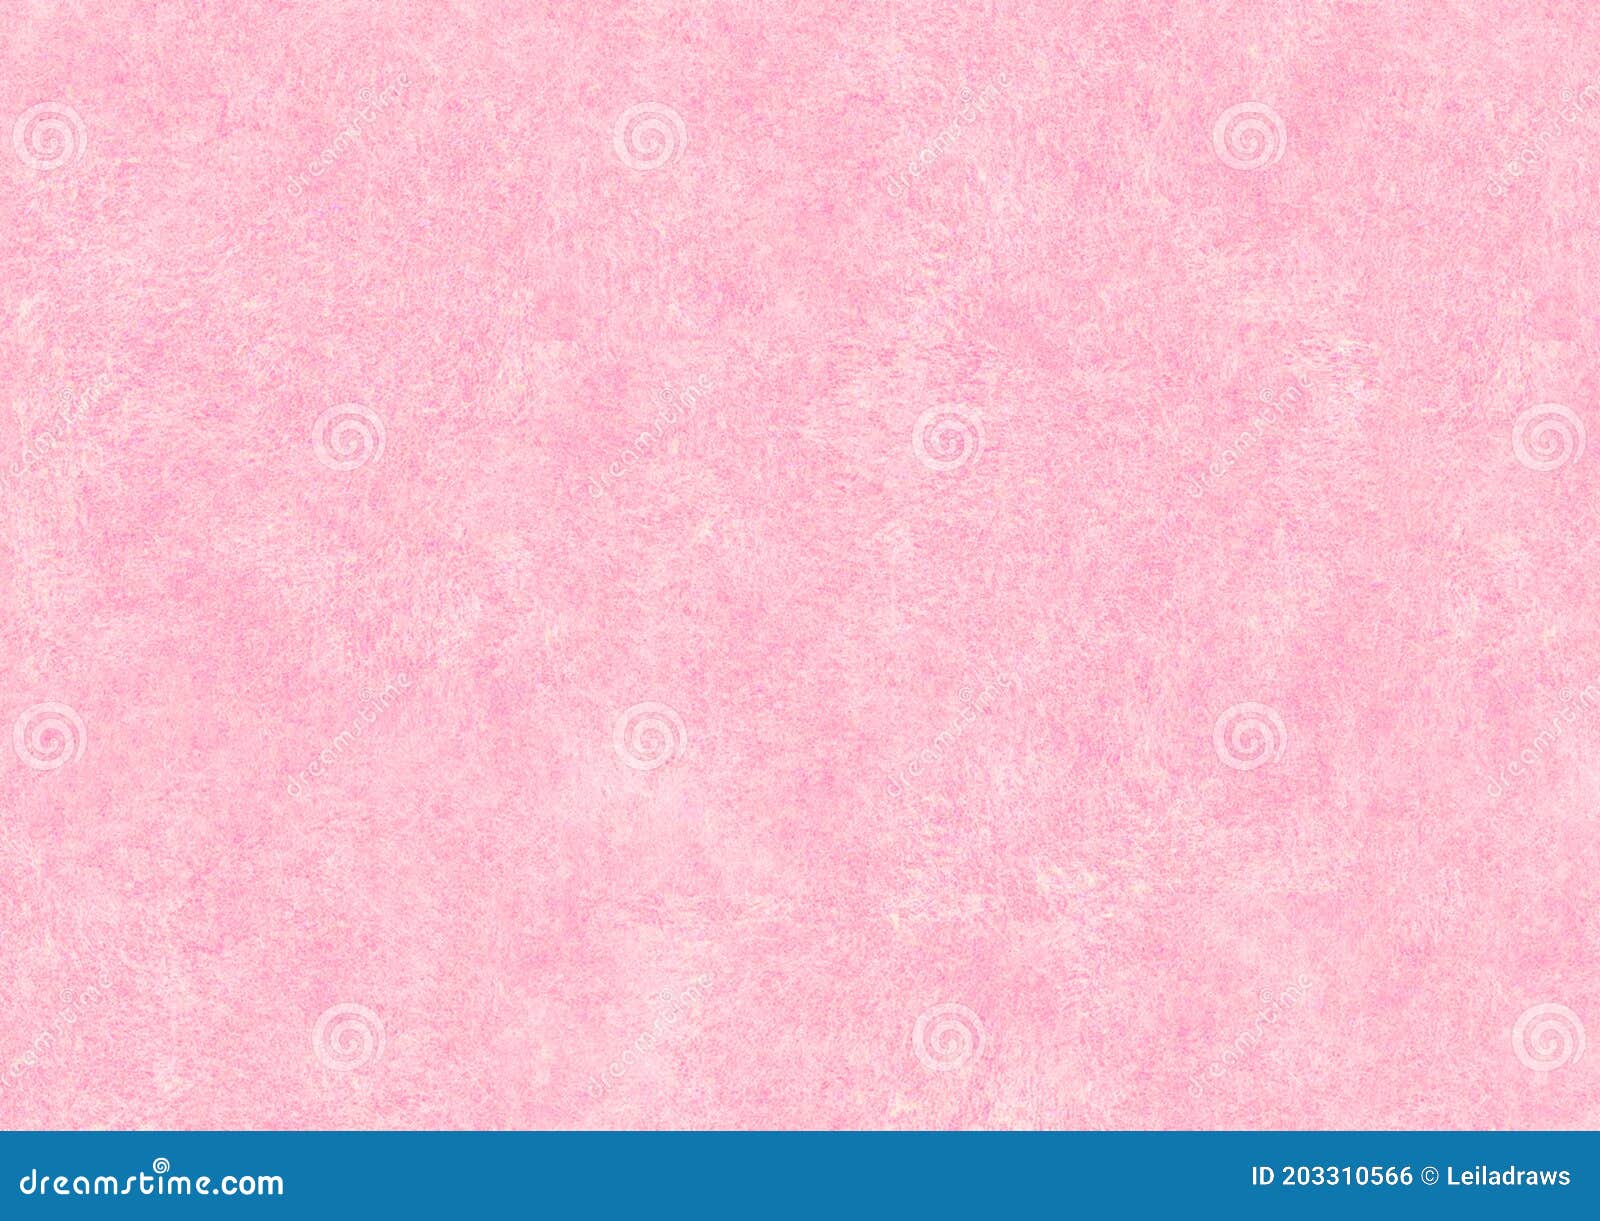 Pink texture stock photo. Image of pastel, mark, rose - 203310566